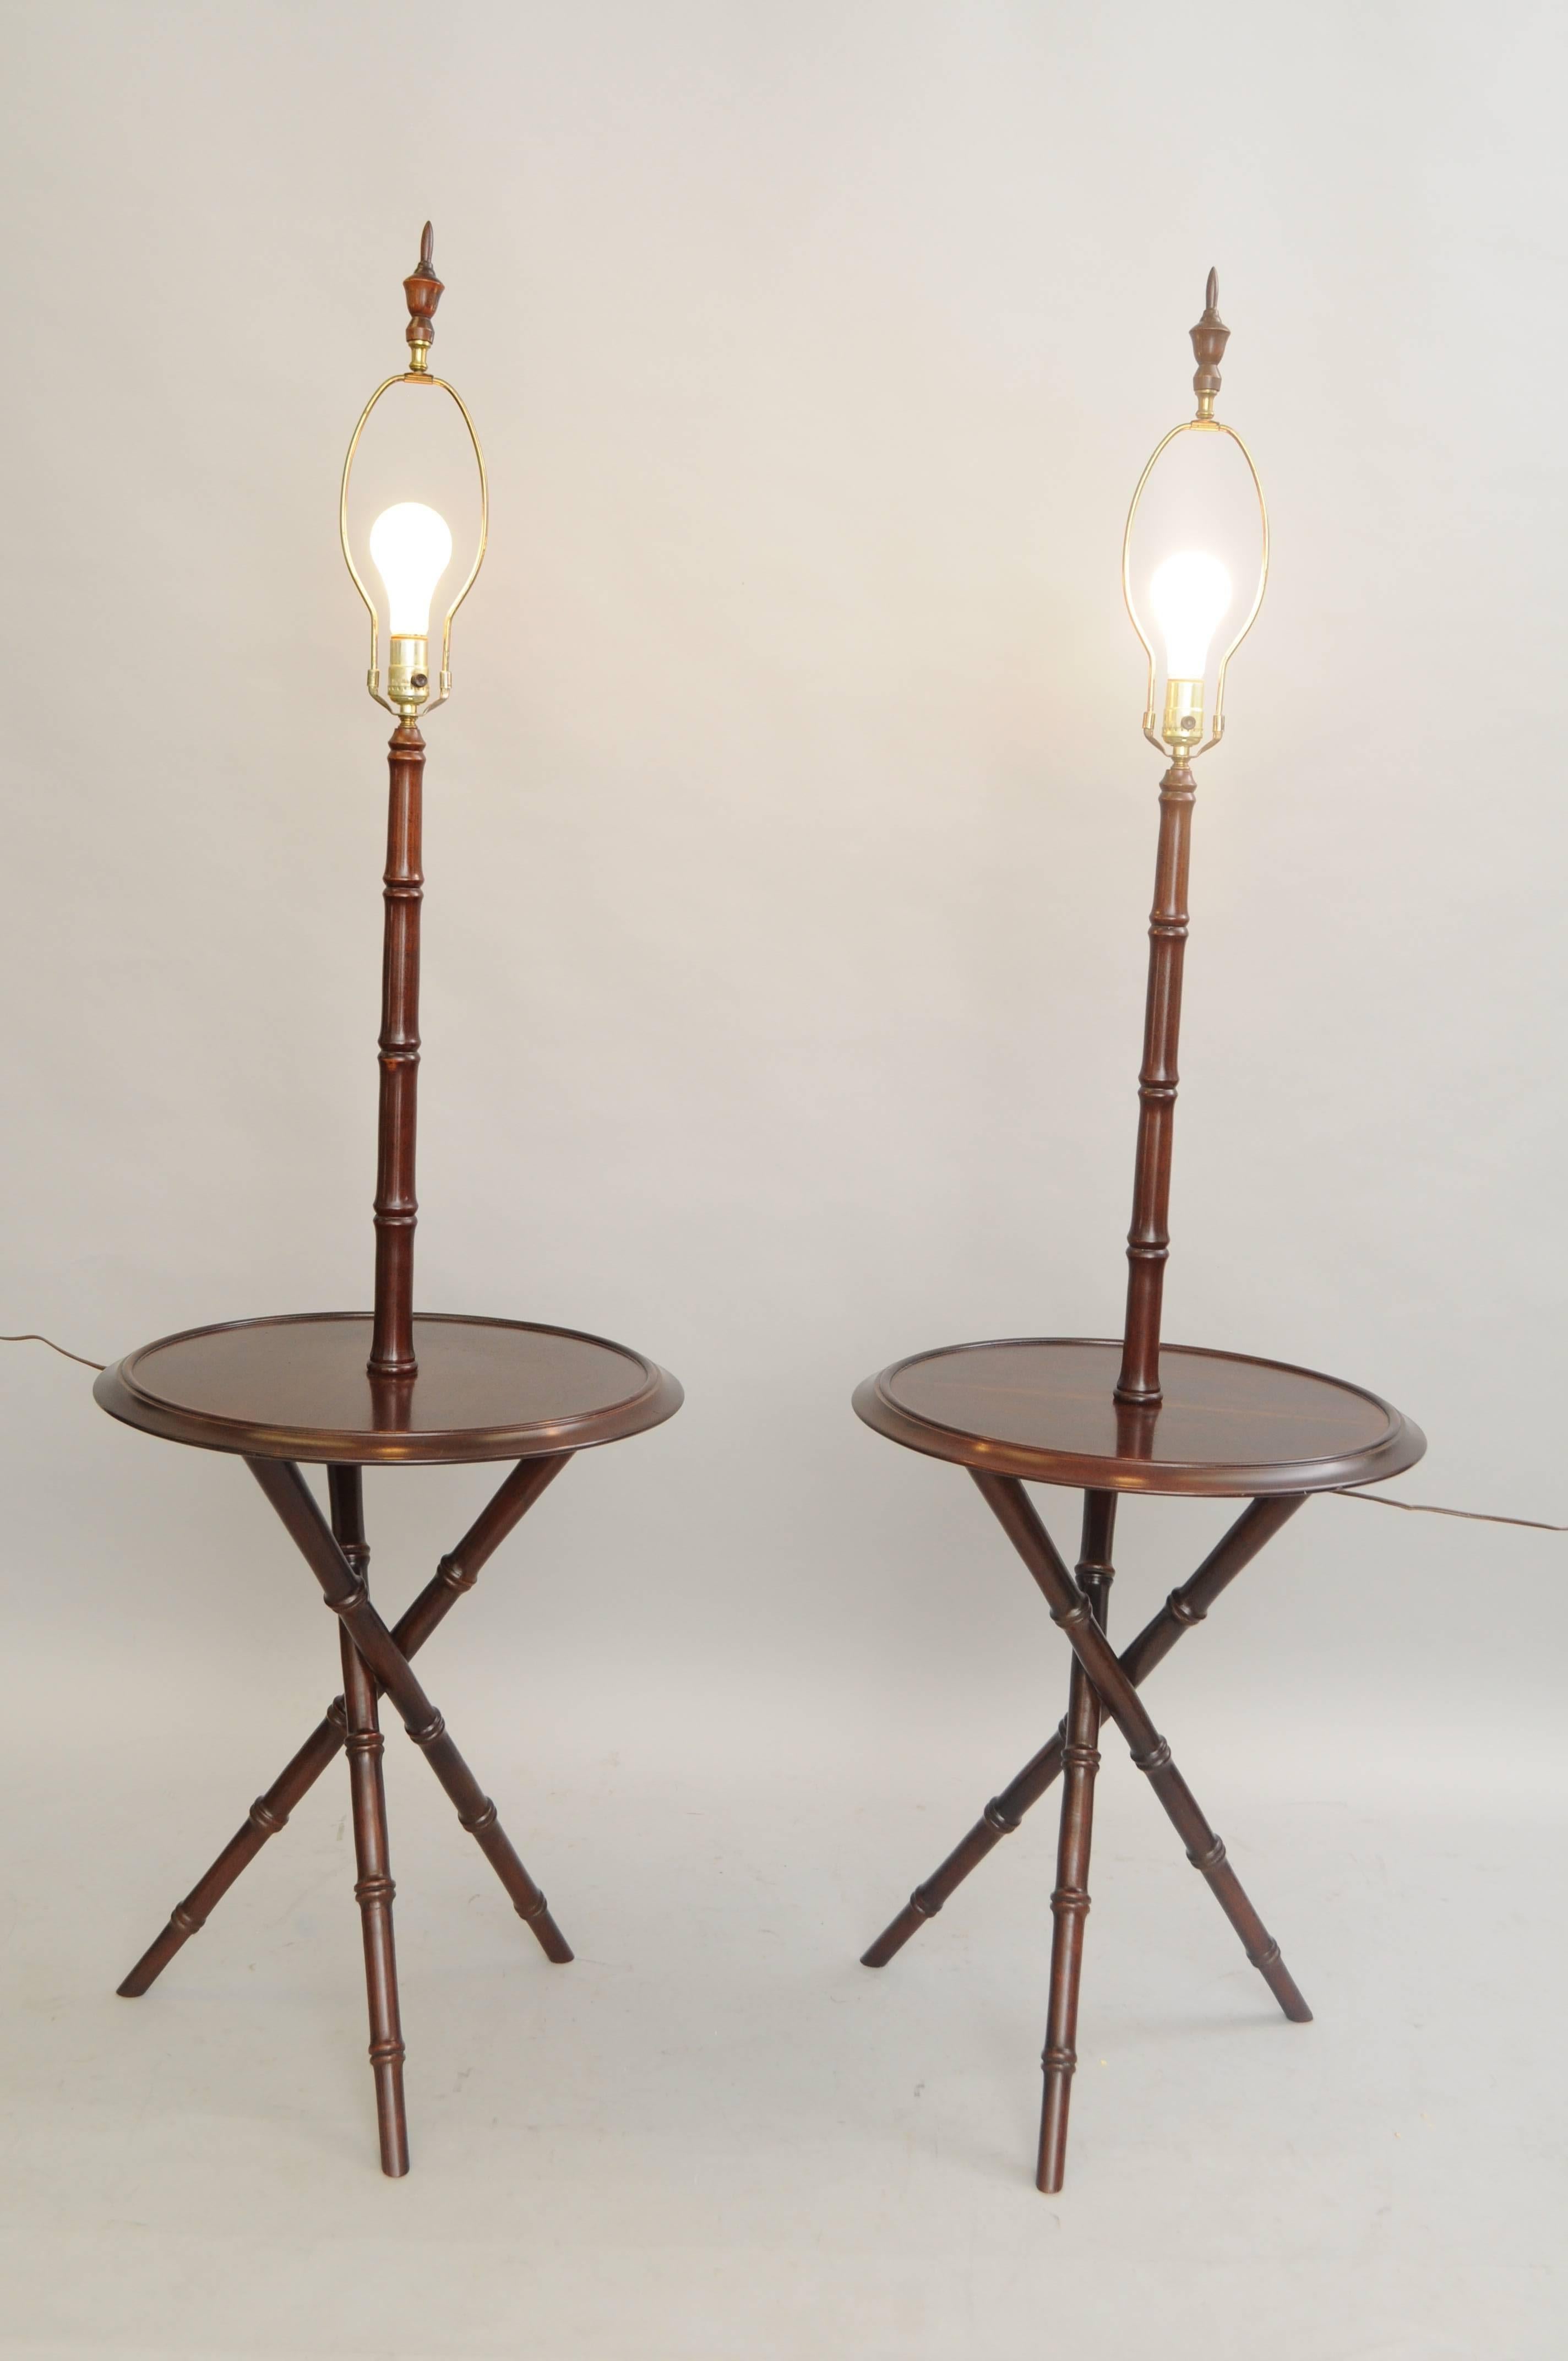 Pair of Vintage Hollywood Regency / Chinese Chippendale style cherrywood lamp tables. Item features cherrywood construction, tripod faux bamboo bases, 20